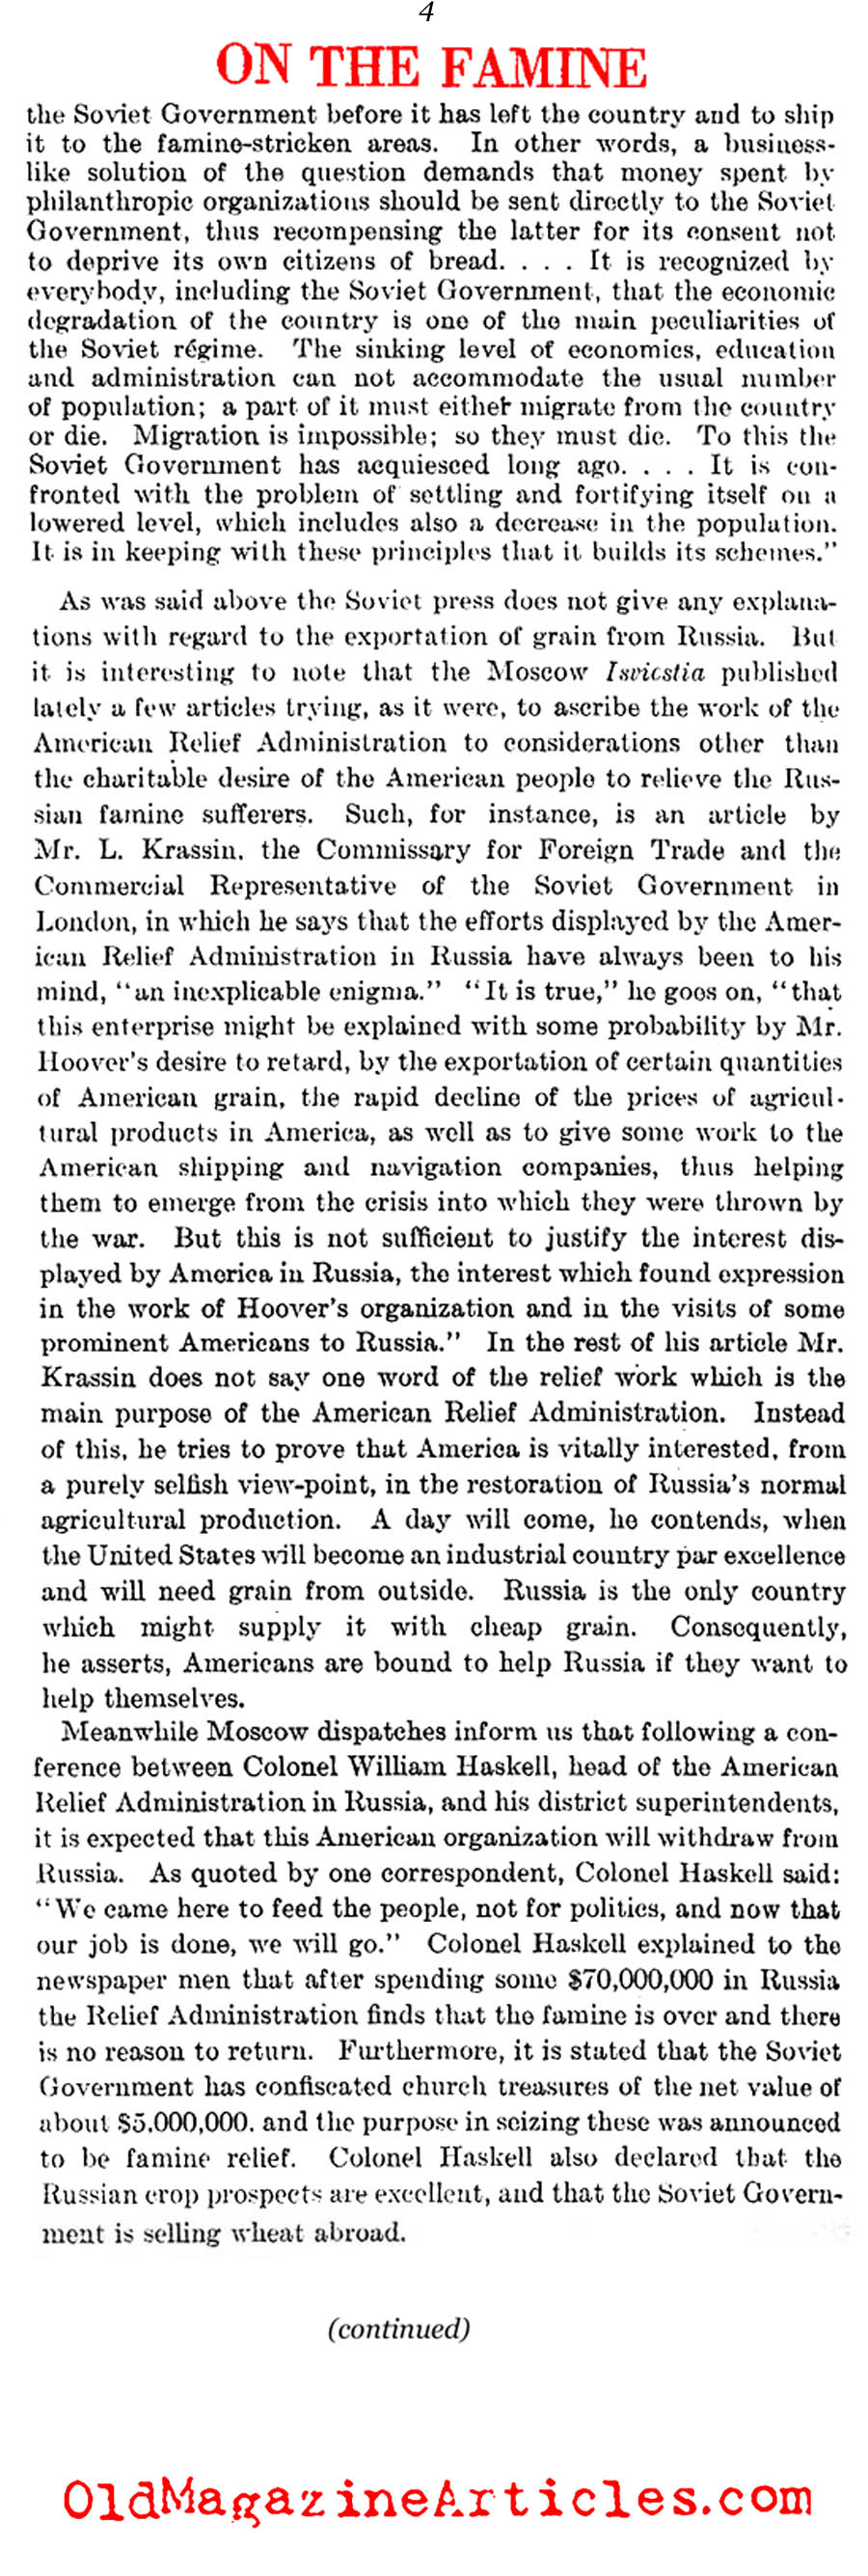 The Soviet Press on Famine Conditions (Literary Digest, 1923)